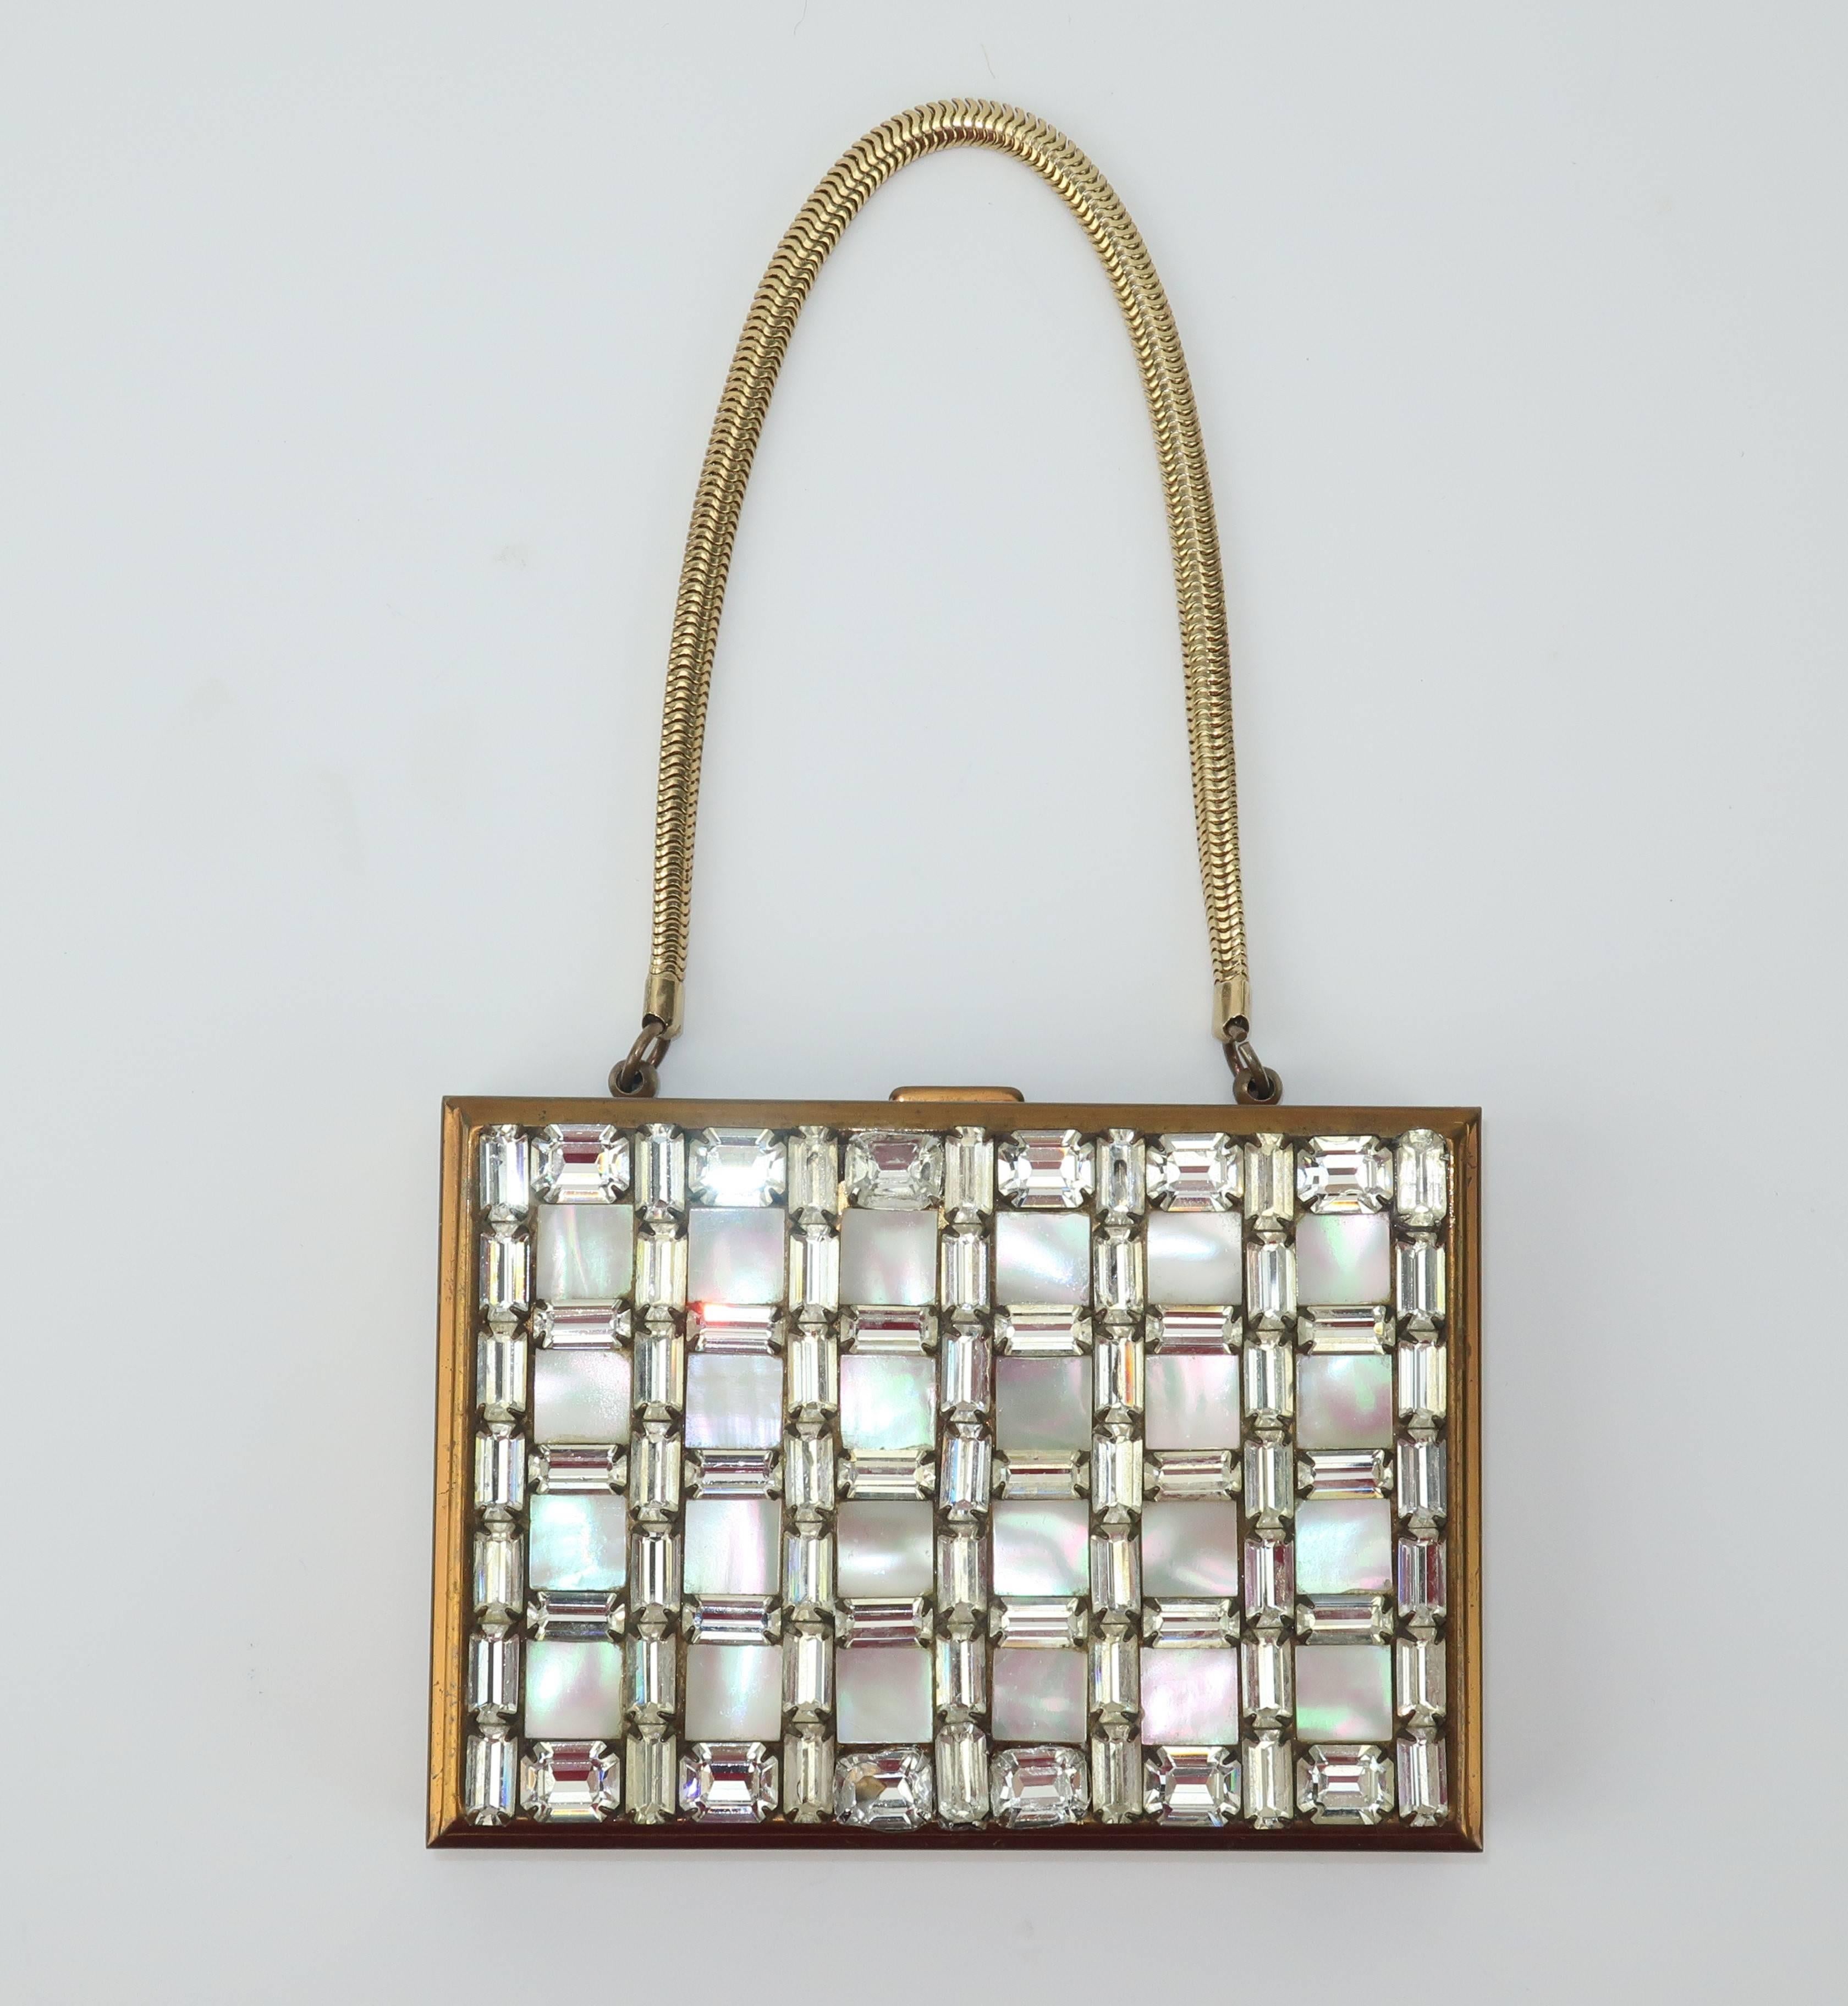 Much like chantelaines, elaborate mirrored compacts are feminine gadgets of a bygone era ... and oh so fun to explore! This Wiesner of Miami compact does double duty as a glamorous evening handbag with an embellished rhinestone and mother-of-pearl